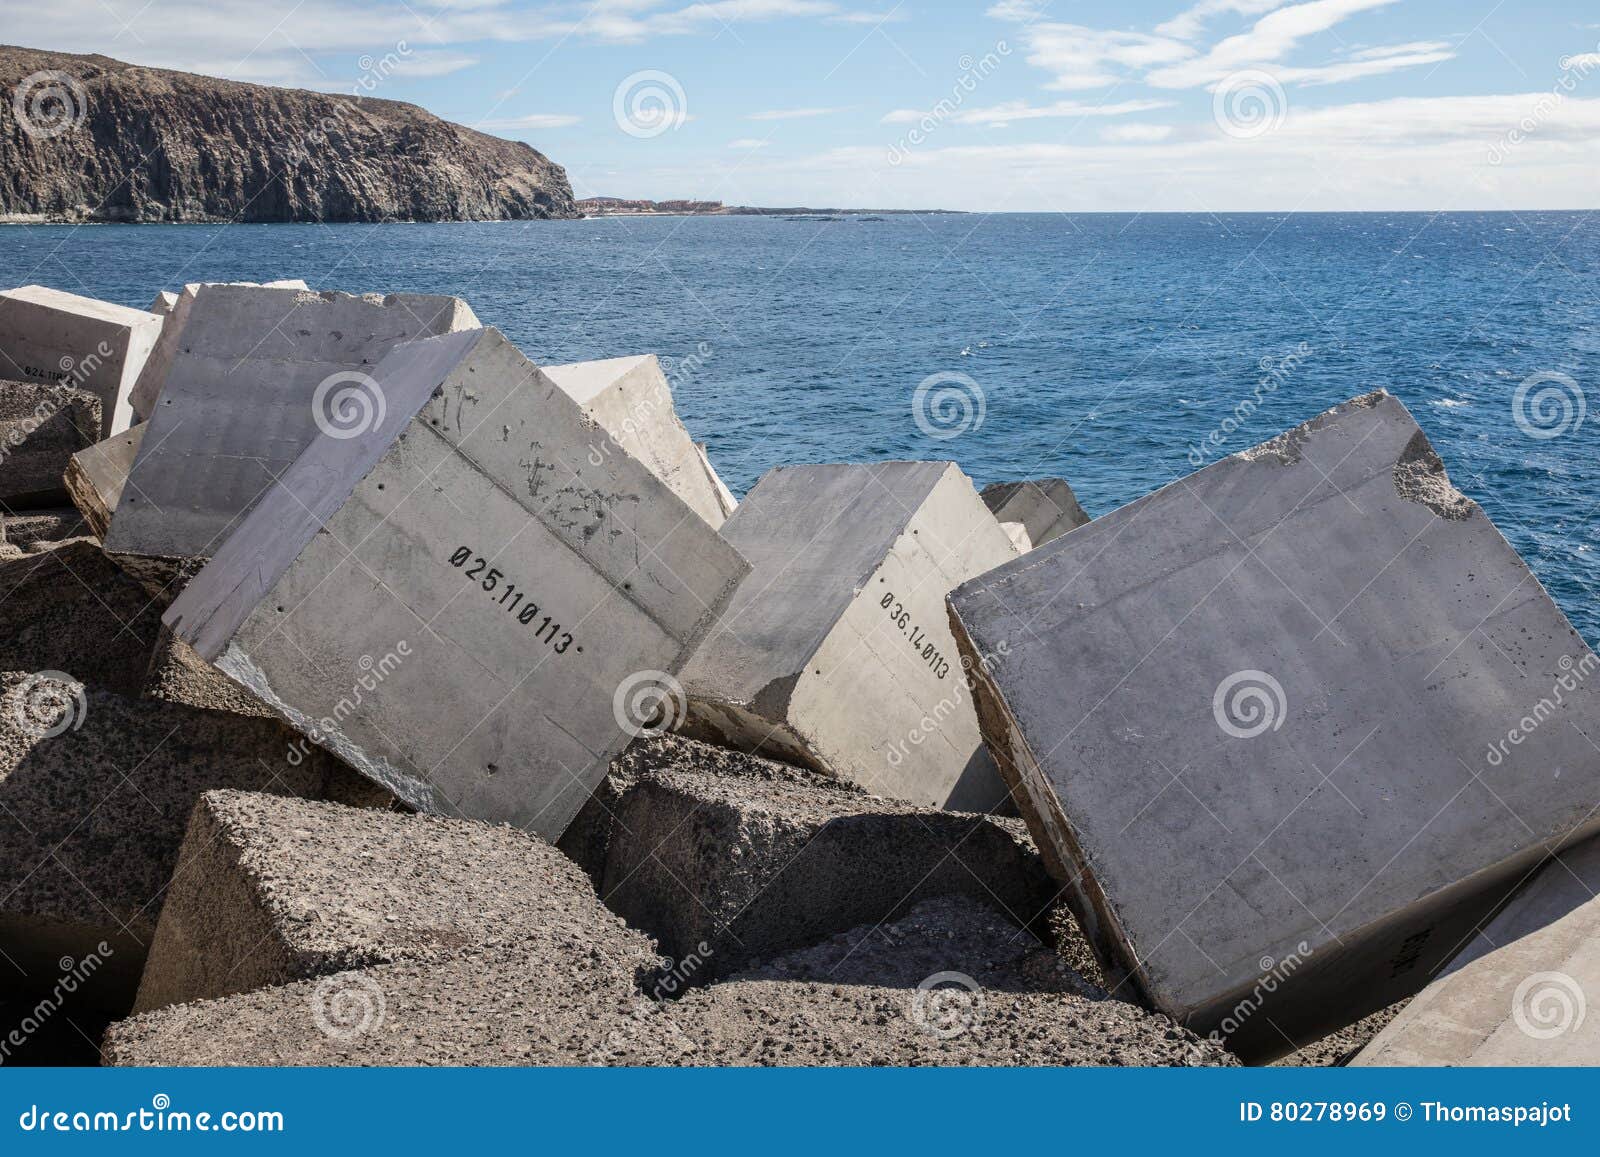 concrete blocks numbered in the jetty of los cristiano